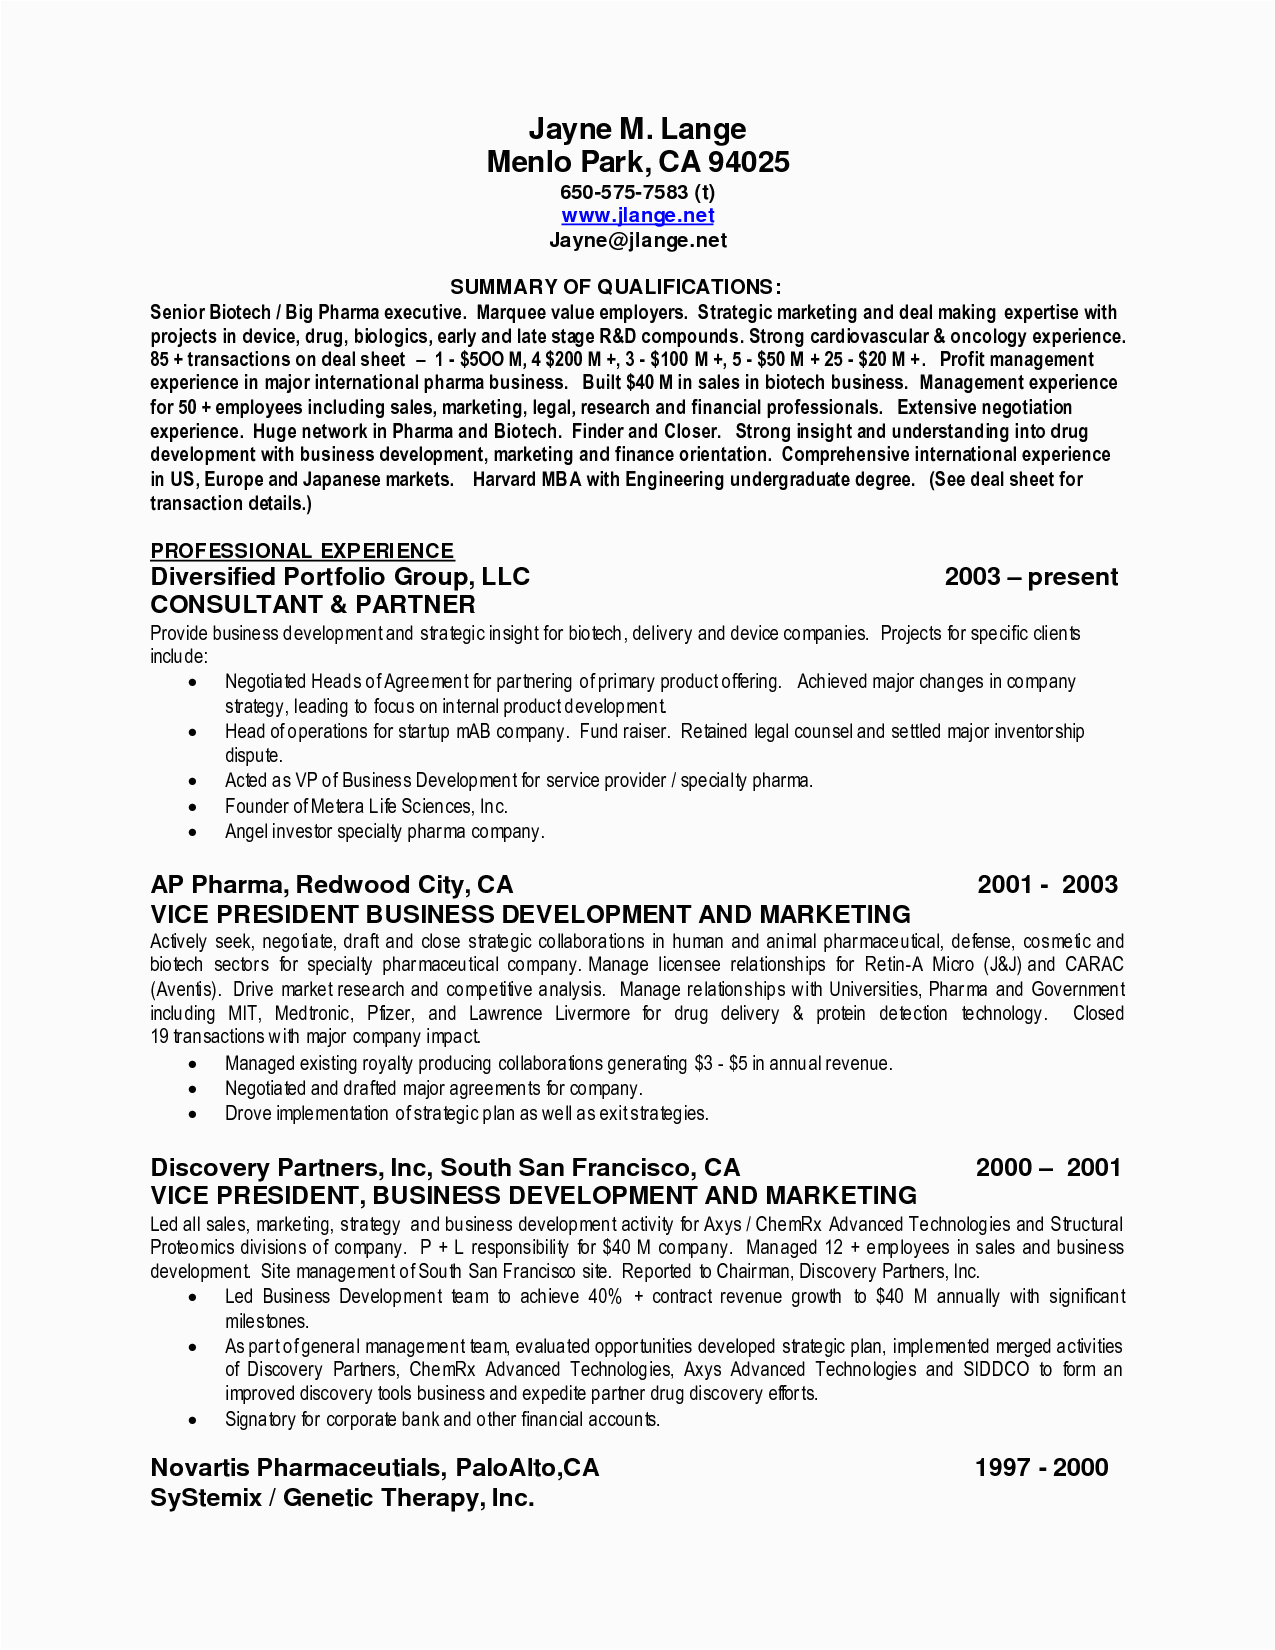 Sample Resume with Summary Of Qualifications format Best Summary Of Qualifications Resume for 2016